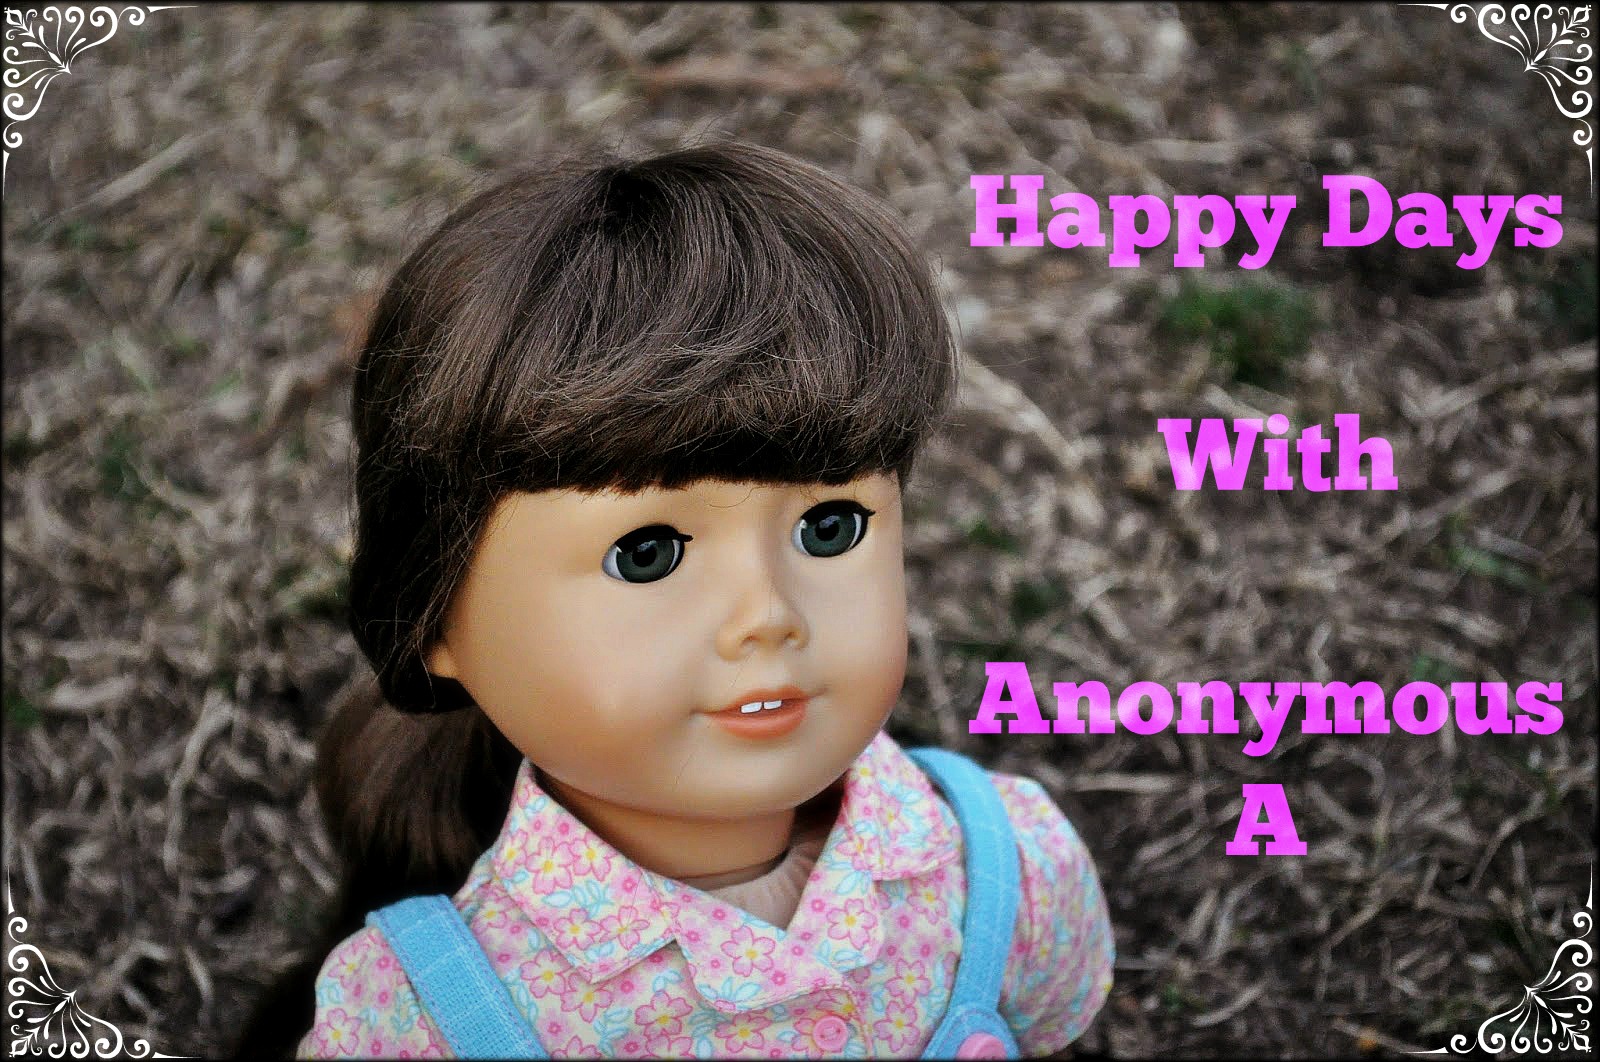 Anonymous A's blog